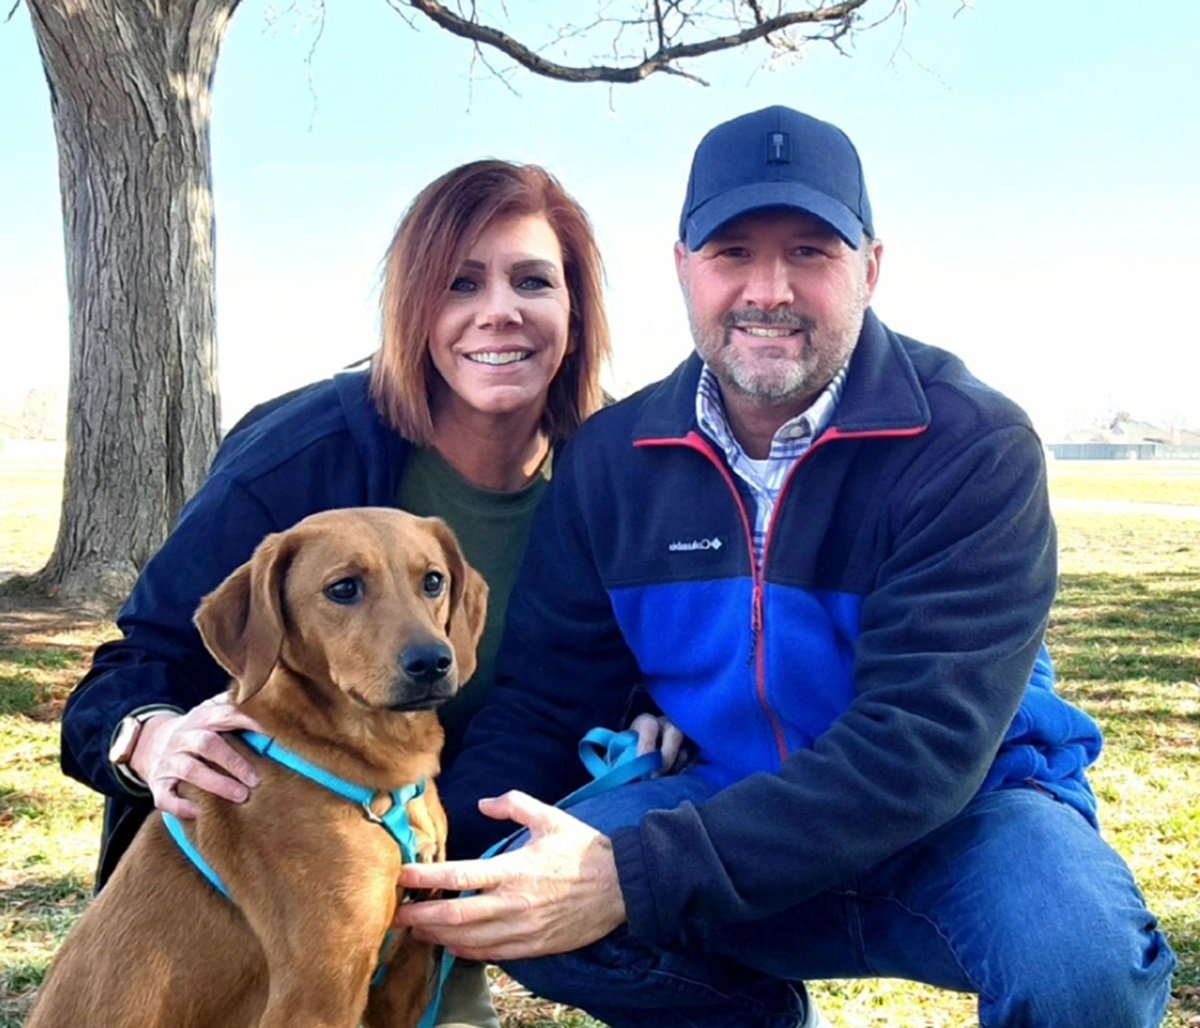 Meri Brown is pictured with her rescue dog, Zona and new boyfriend, Amos, in a recent snapshot